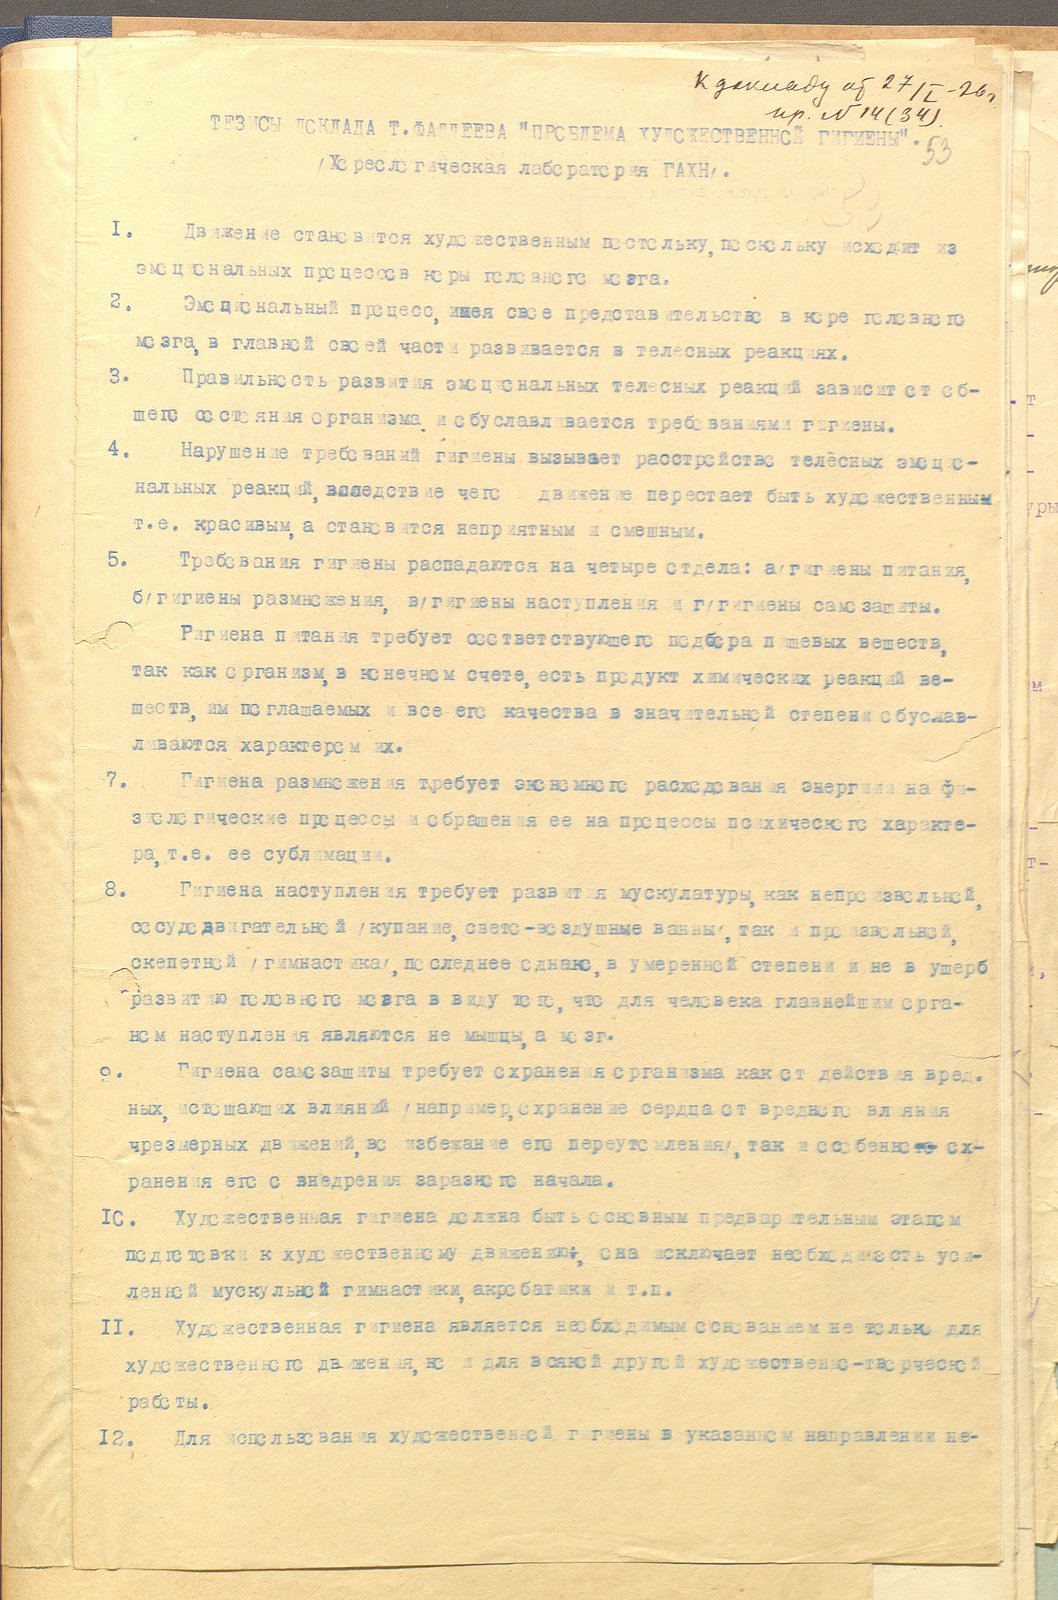 Theses from T. D. Faddeev's report "Problems of Artistic Hygiene," RAAS Choreological Laboratory, January 27, 1926 Russian State Archive of Literature and Arts (RGALI)